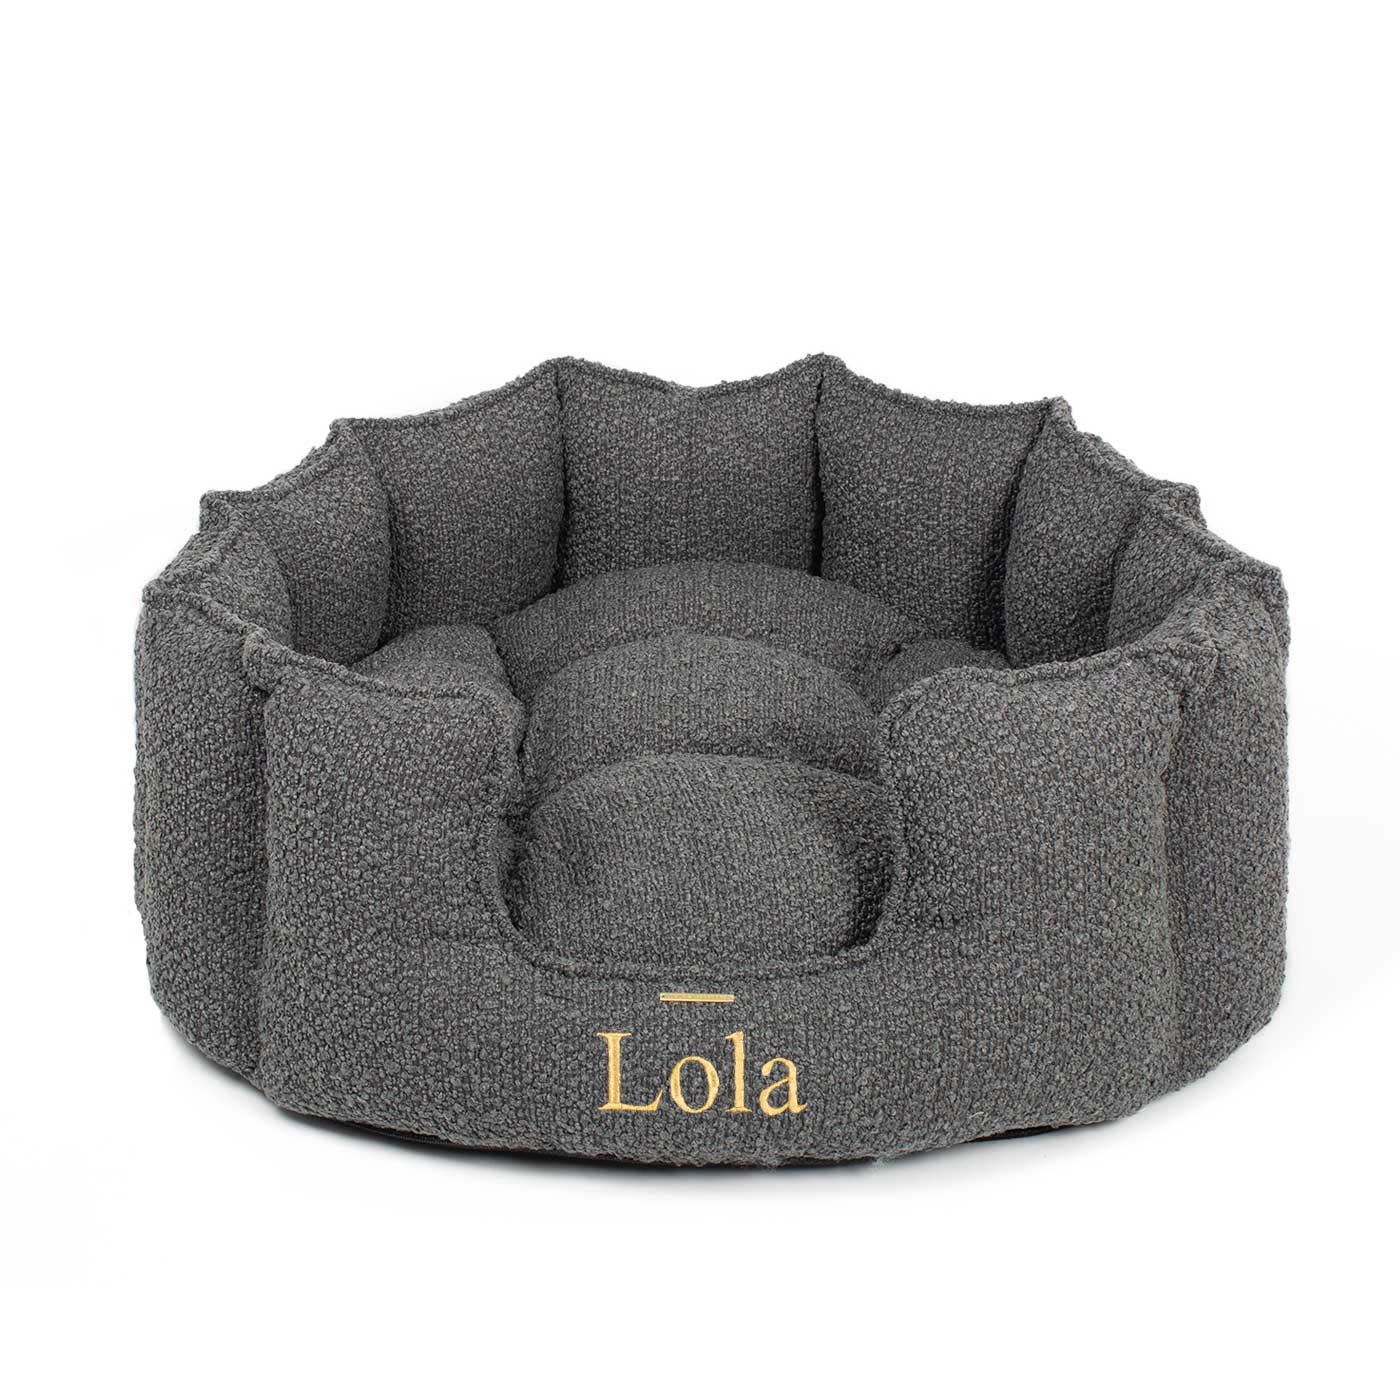  Discover Our Luxurious High Wall Bed For Dogs, Featuring inner pillow with plush teddy fleece on one side To Craft The Perfect Dogs Bed In Stunning Granite Bouclé! Available To Personalize Now at Lords & Labradors US